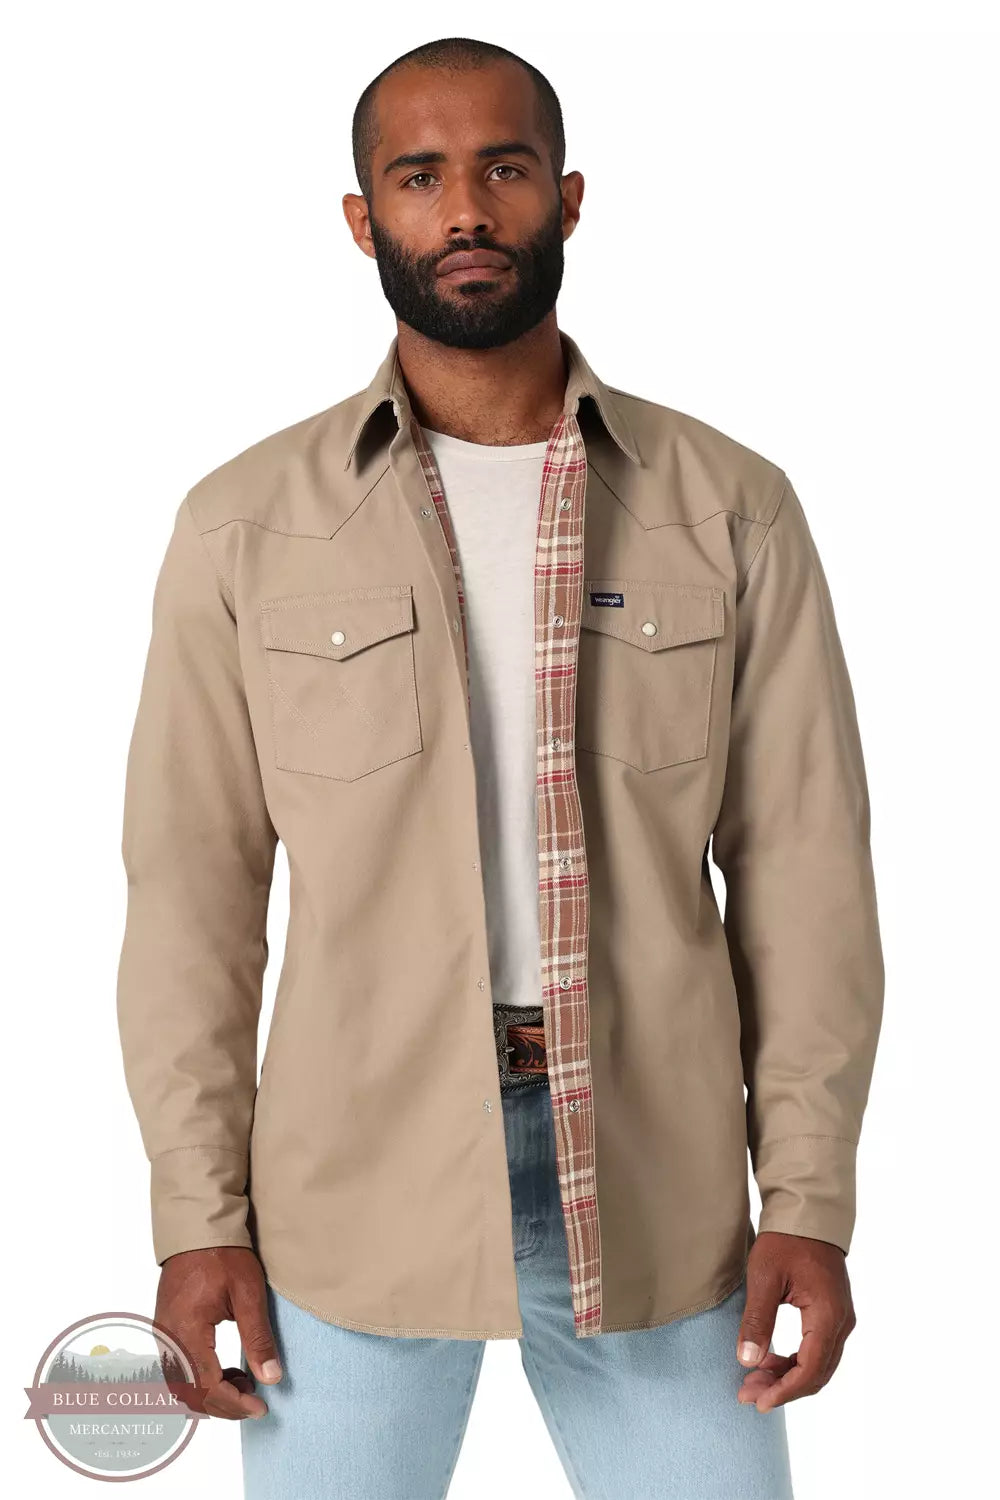 Wrangler 112330931 Flannel Lined Workshirt in Dune Front View